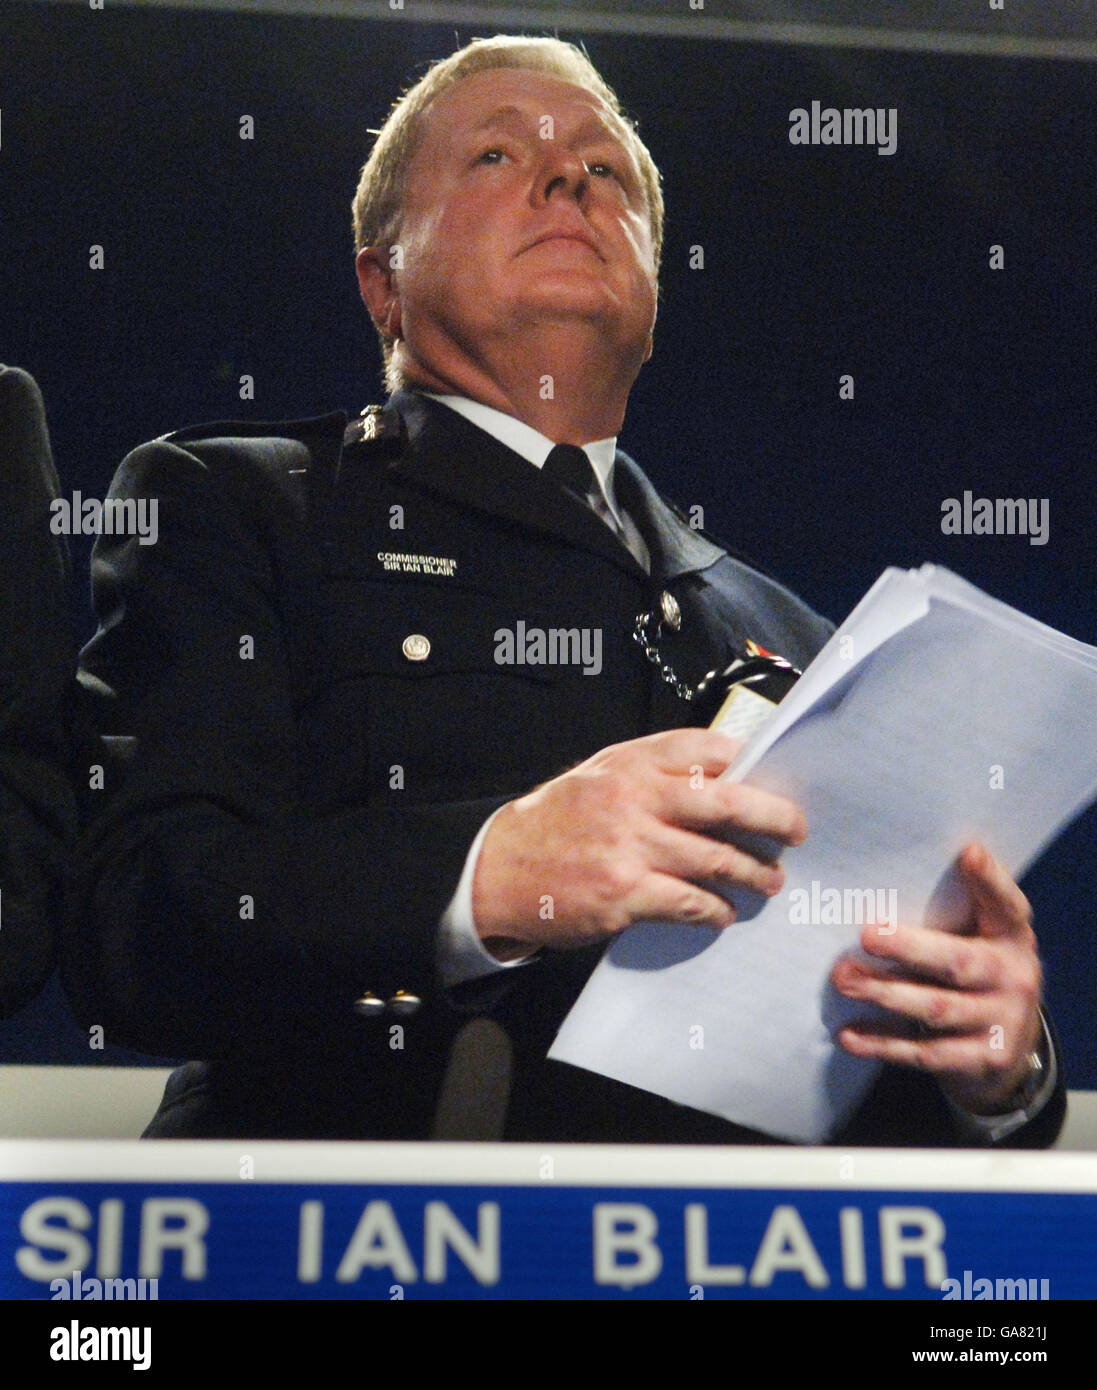 Metropolitan Police Commissioner, Sir Ian Blair, makes a statement during a news conference at Scotland Yard, London about the IPCC report into the killing of Jean Charles de Menezes at Stockwell tube station in 2005. Stock Photo